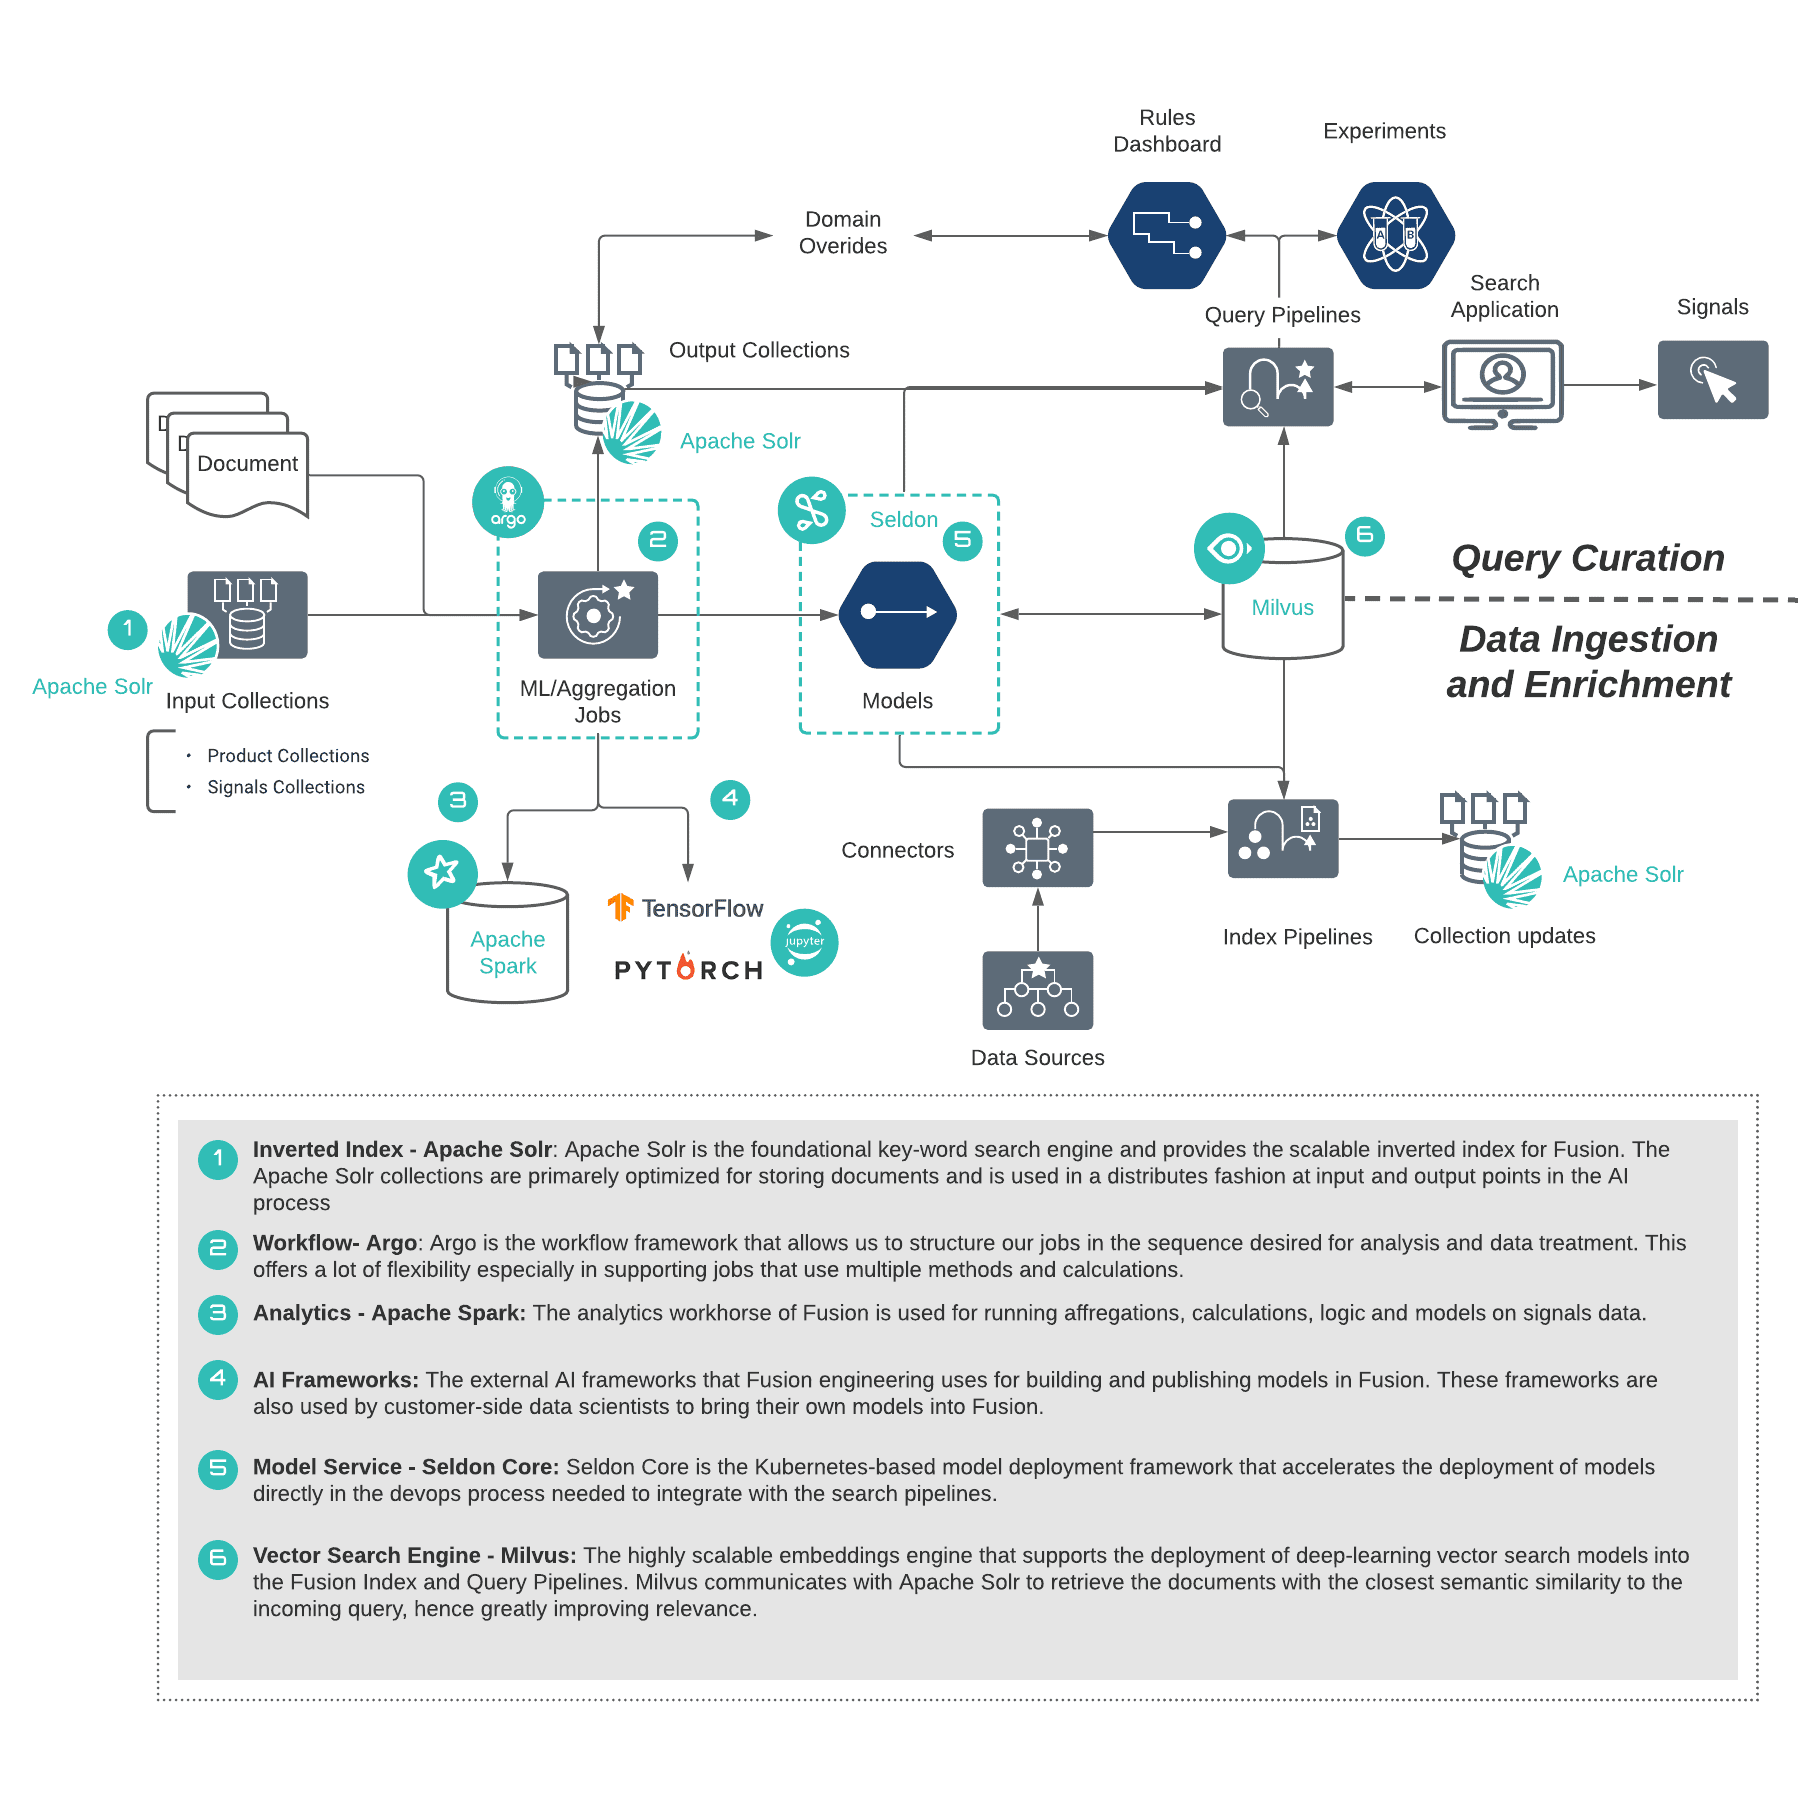 Diagram summarizes how the services are overlaid on the AI flow that was described above.